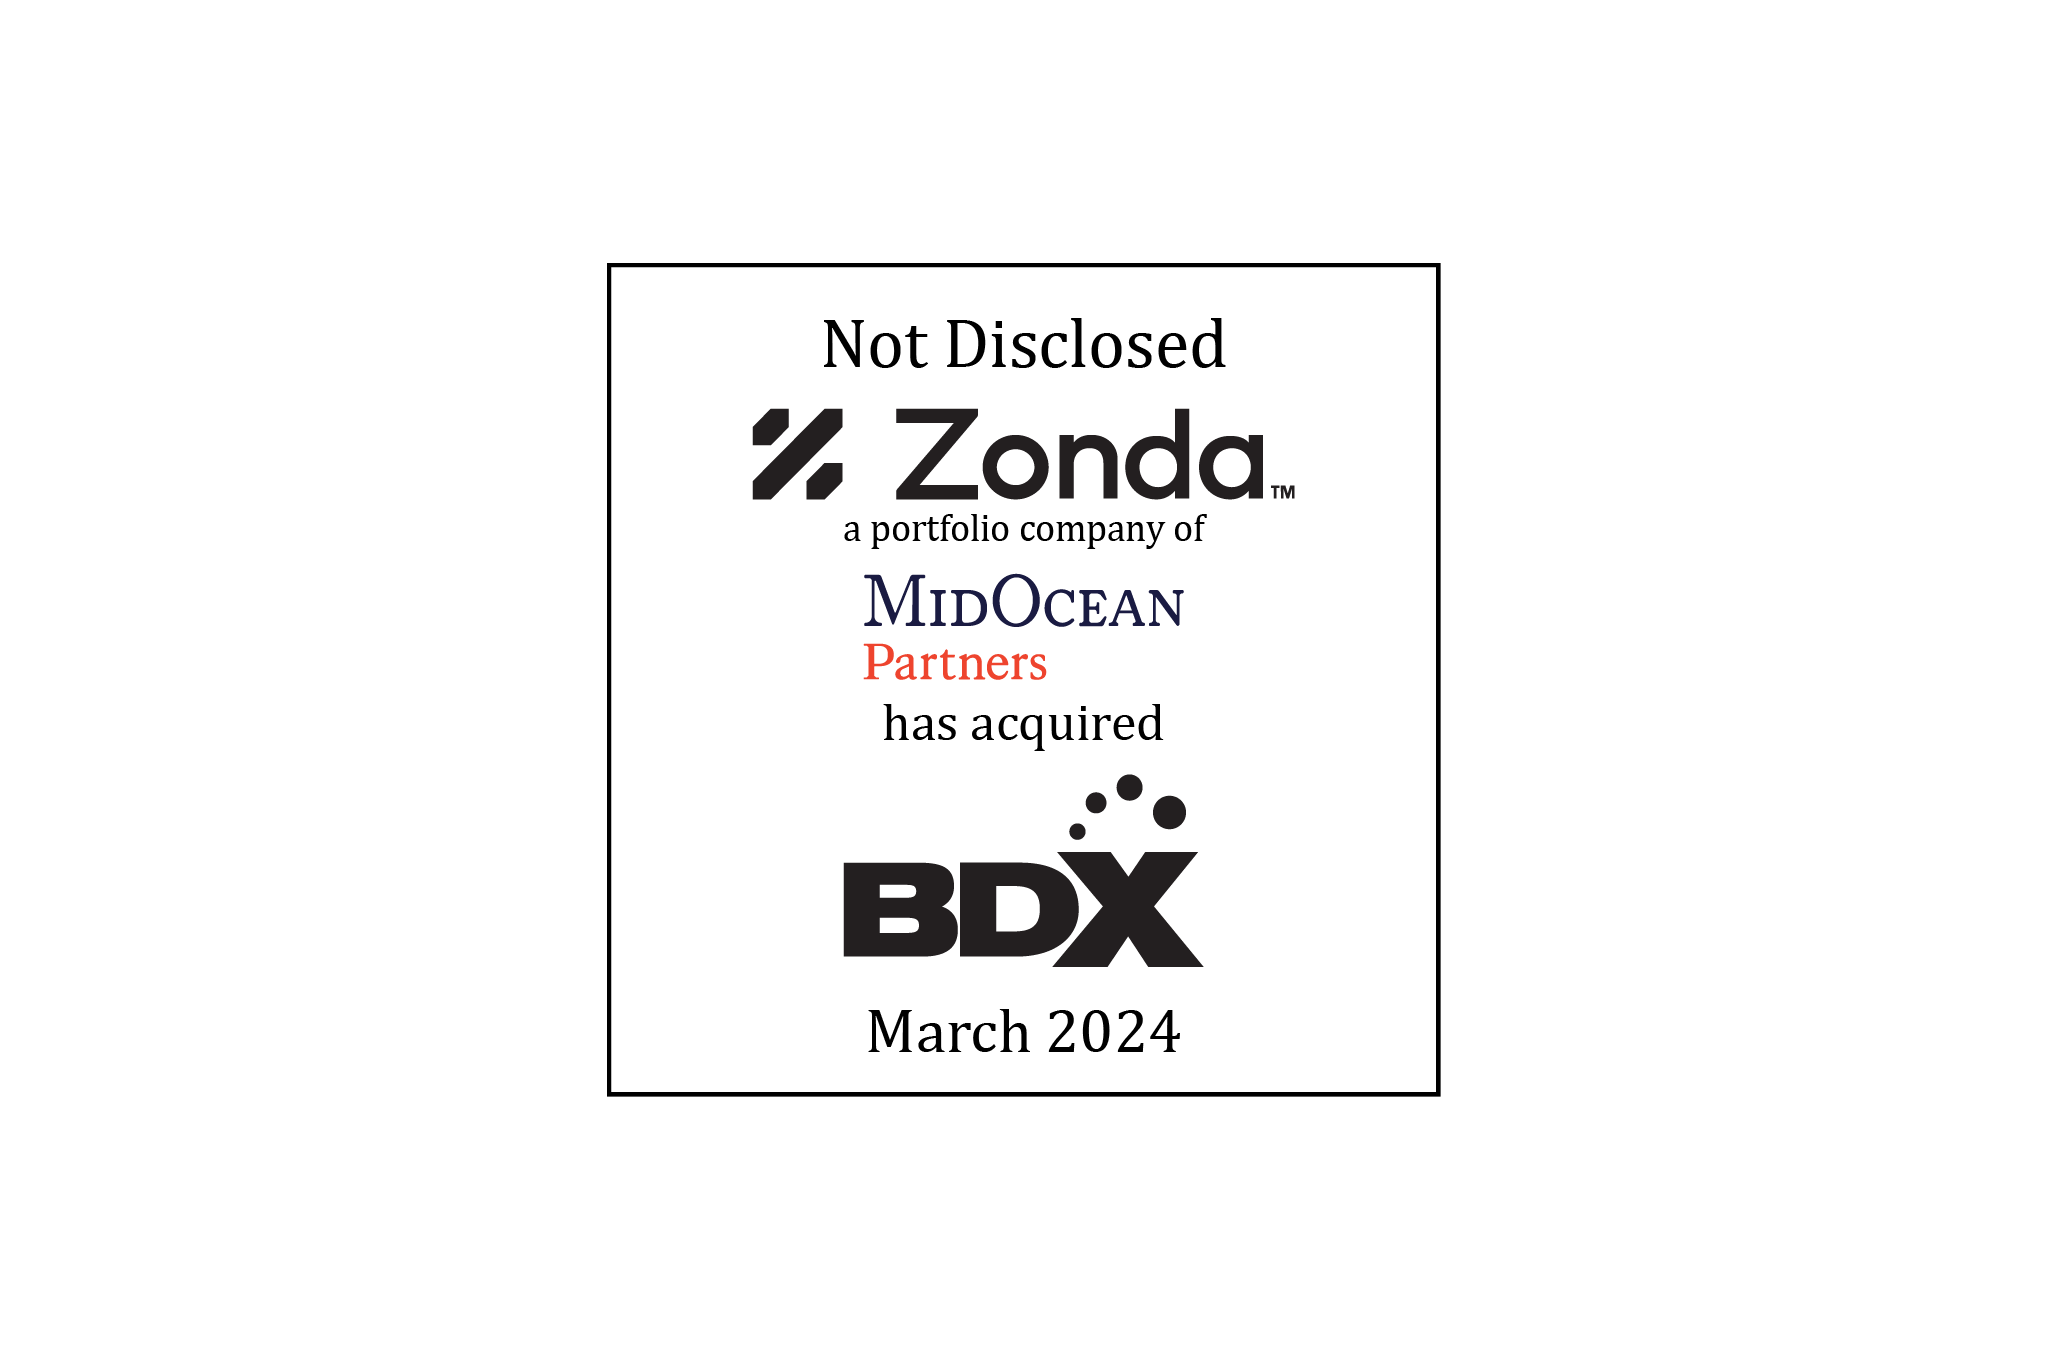 Not Disclosed | Zonda (logo), a portfolio company of MidOcean Partners (logo), has acquired Builders Digital Experience (logo) | March 2024 